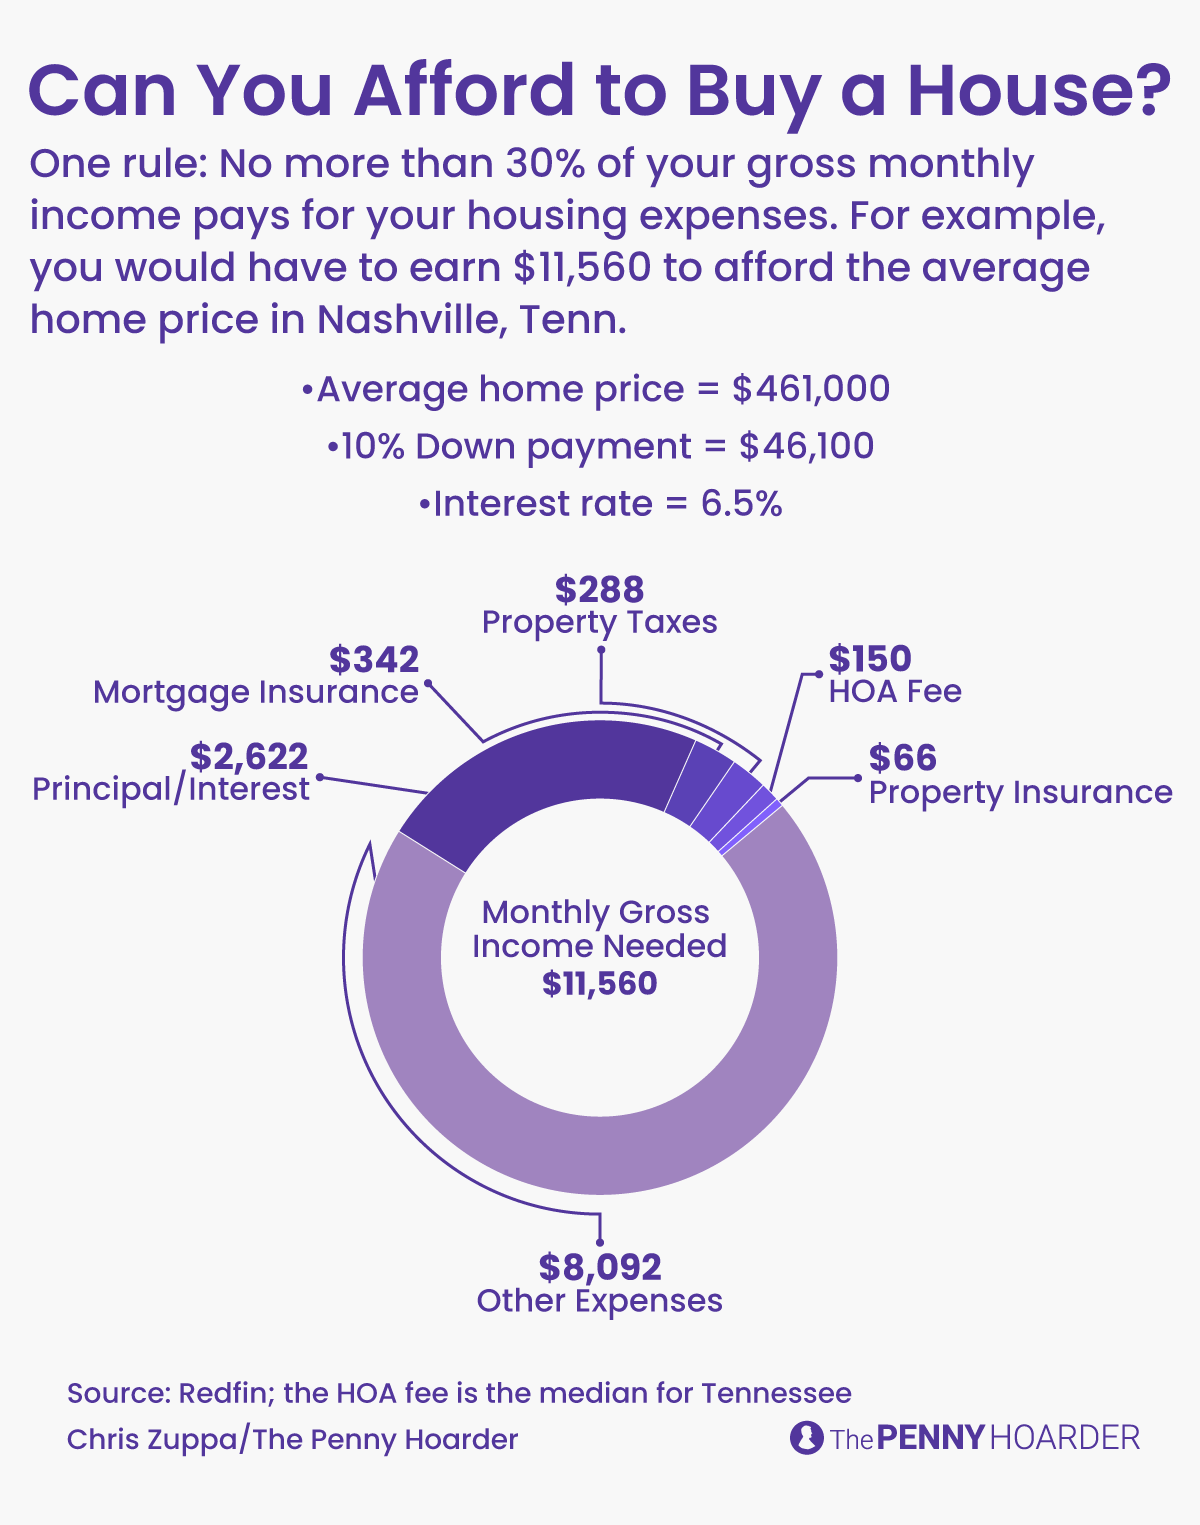 This donut graphic visually shows you how much you need to earn in a month to afford to buy a home in Nashville, Tennessee, based on the 28% rule and some assumptions. The 28% rule says that no more than 28% of your gross monthly income should pay for your housing expenses. The assumptions for the graphic are the average cost of a home in Nashville is $461,000, a buyer puts down a 10% down payment, so your mortgage is $400,000. Monthly taxes, property insurance, private mortgage insurance, the HOA fee, principal, and interest total $3,468. You will need to earn $12,386 a month to afford a home.